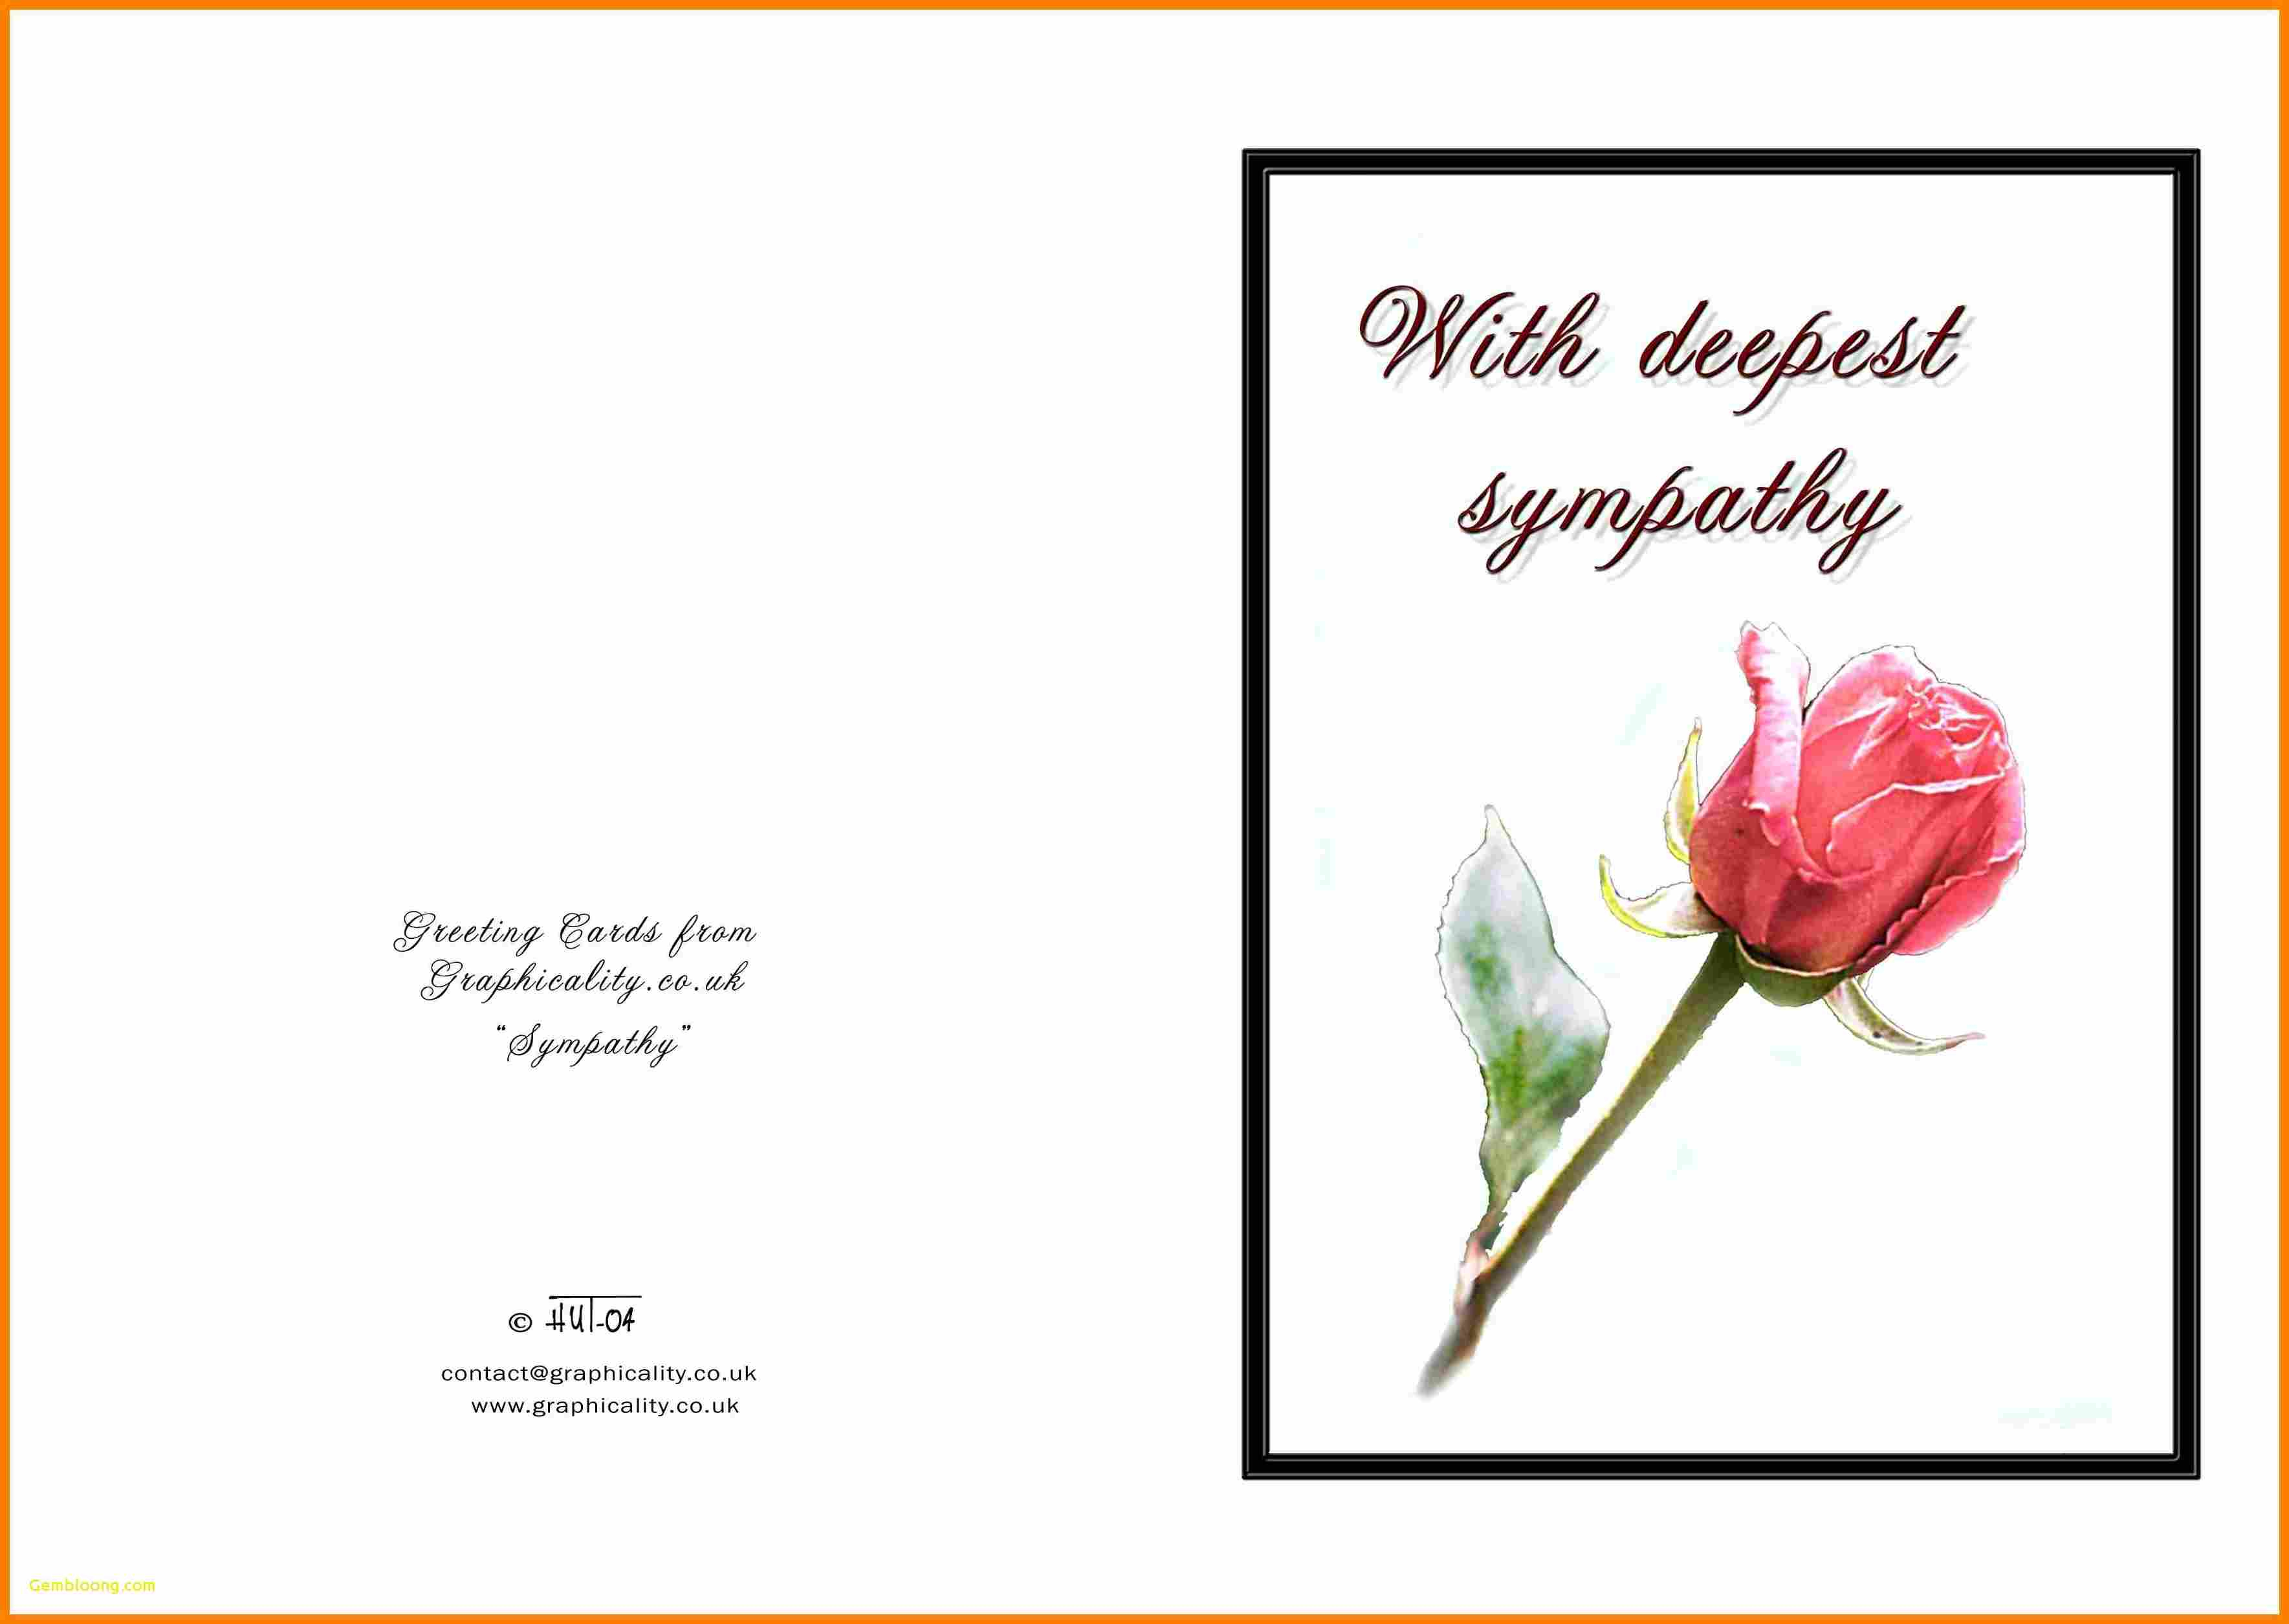 98+ Condolence Messages And Sincere Sympathy Sayings For Loss - Free Printable Sympathy Verses